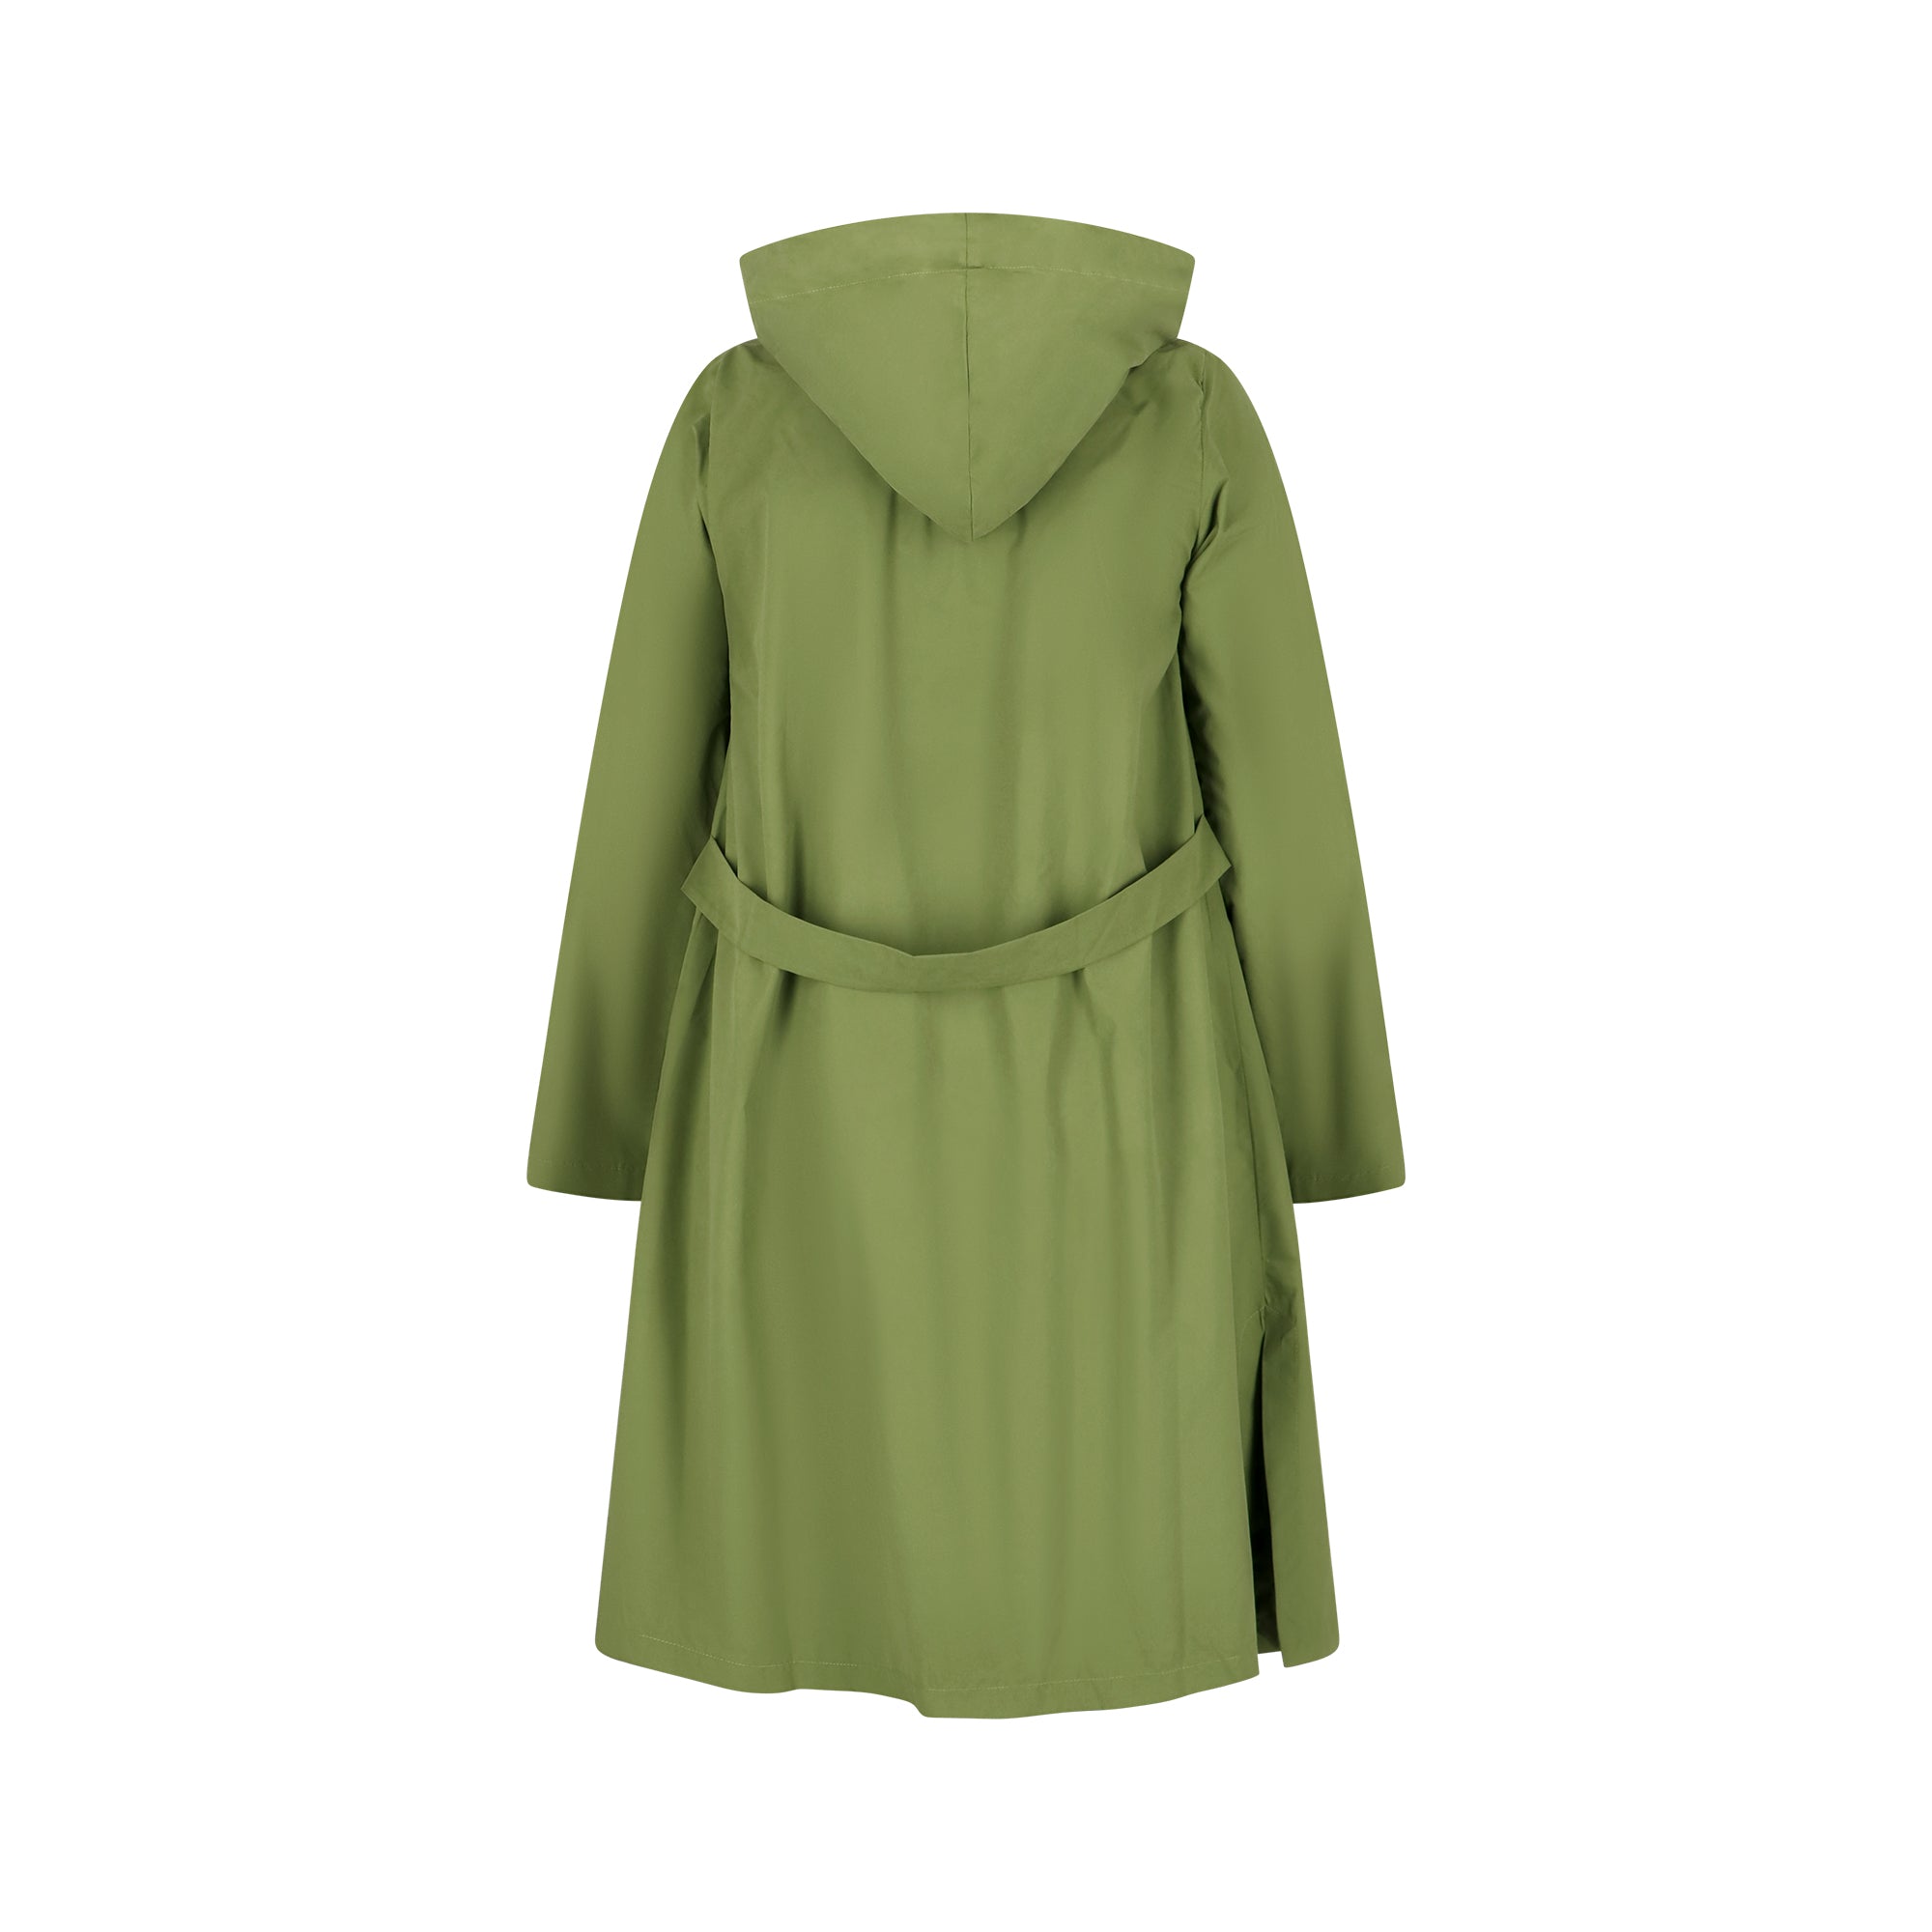 The classic raincoat - green color - back view